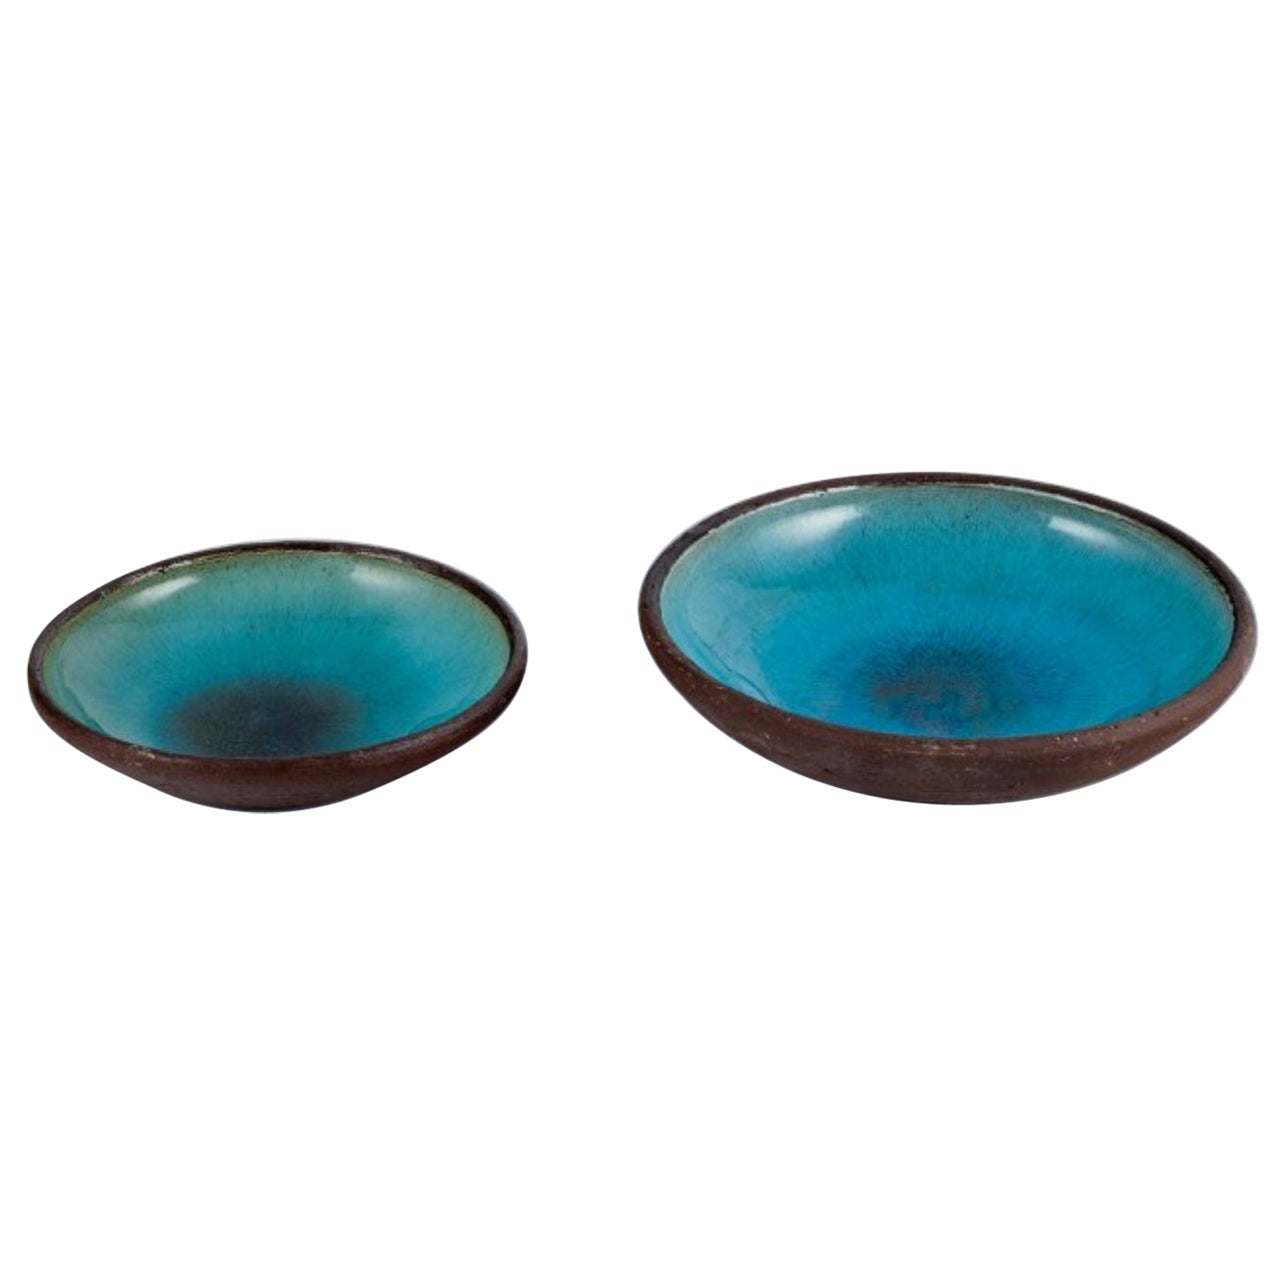 Osa, Denmark, Two Large Retro Unique Ceramic Bowls with Glaze in Turquoise Tones For Sale